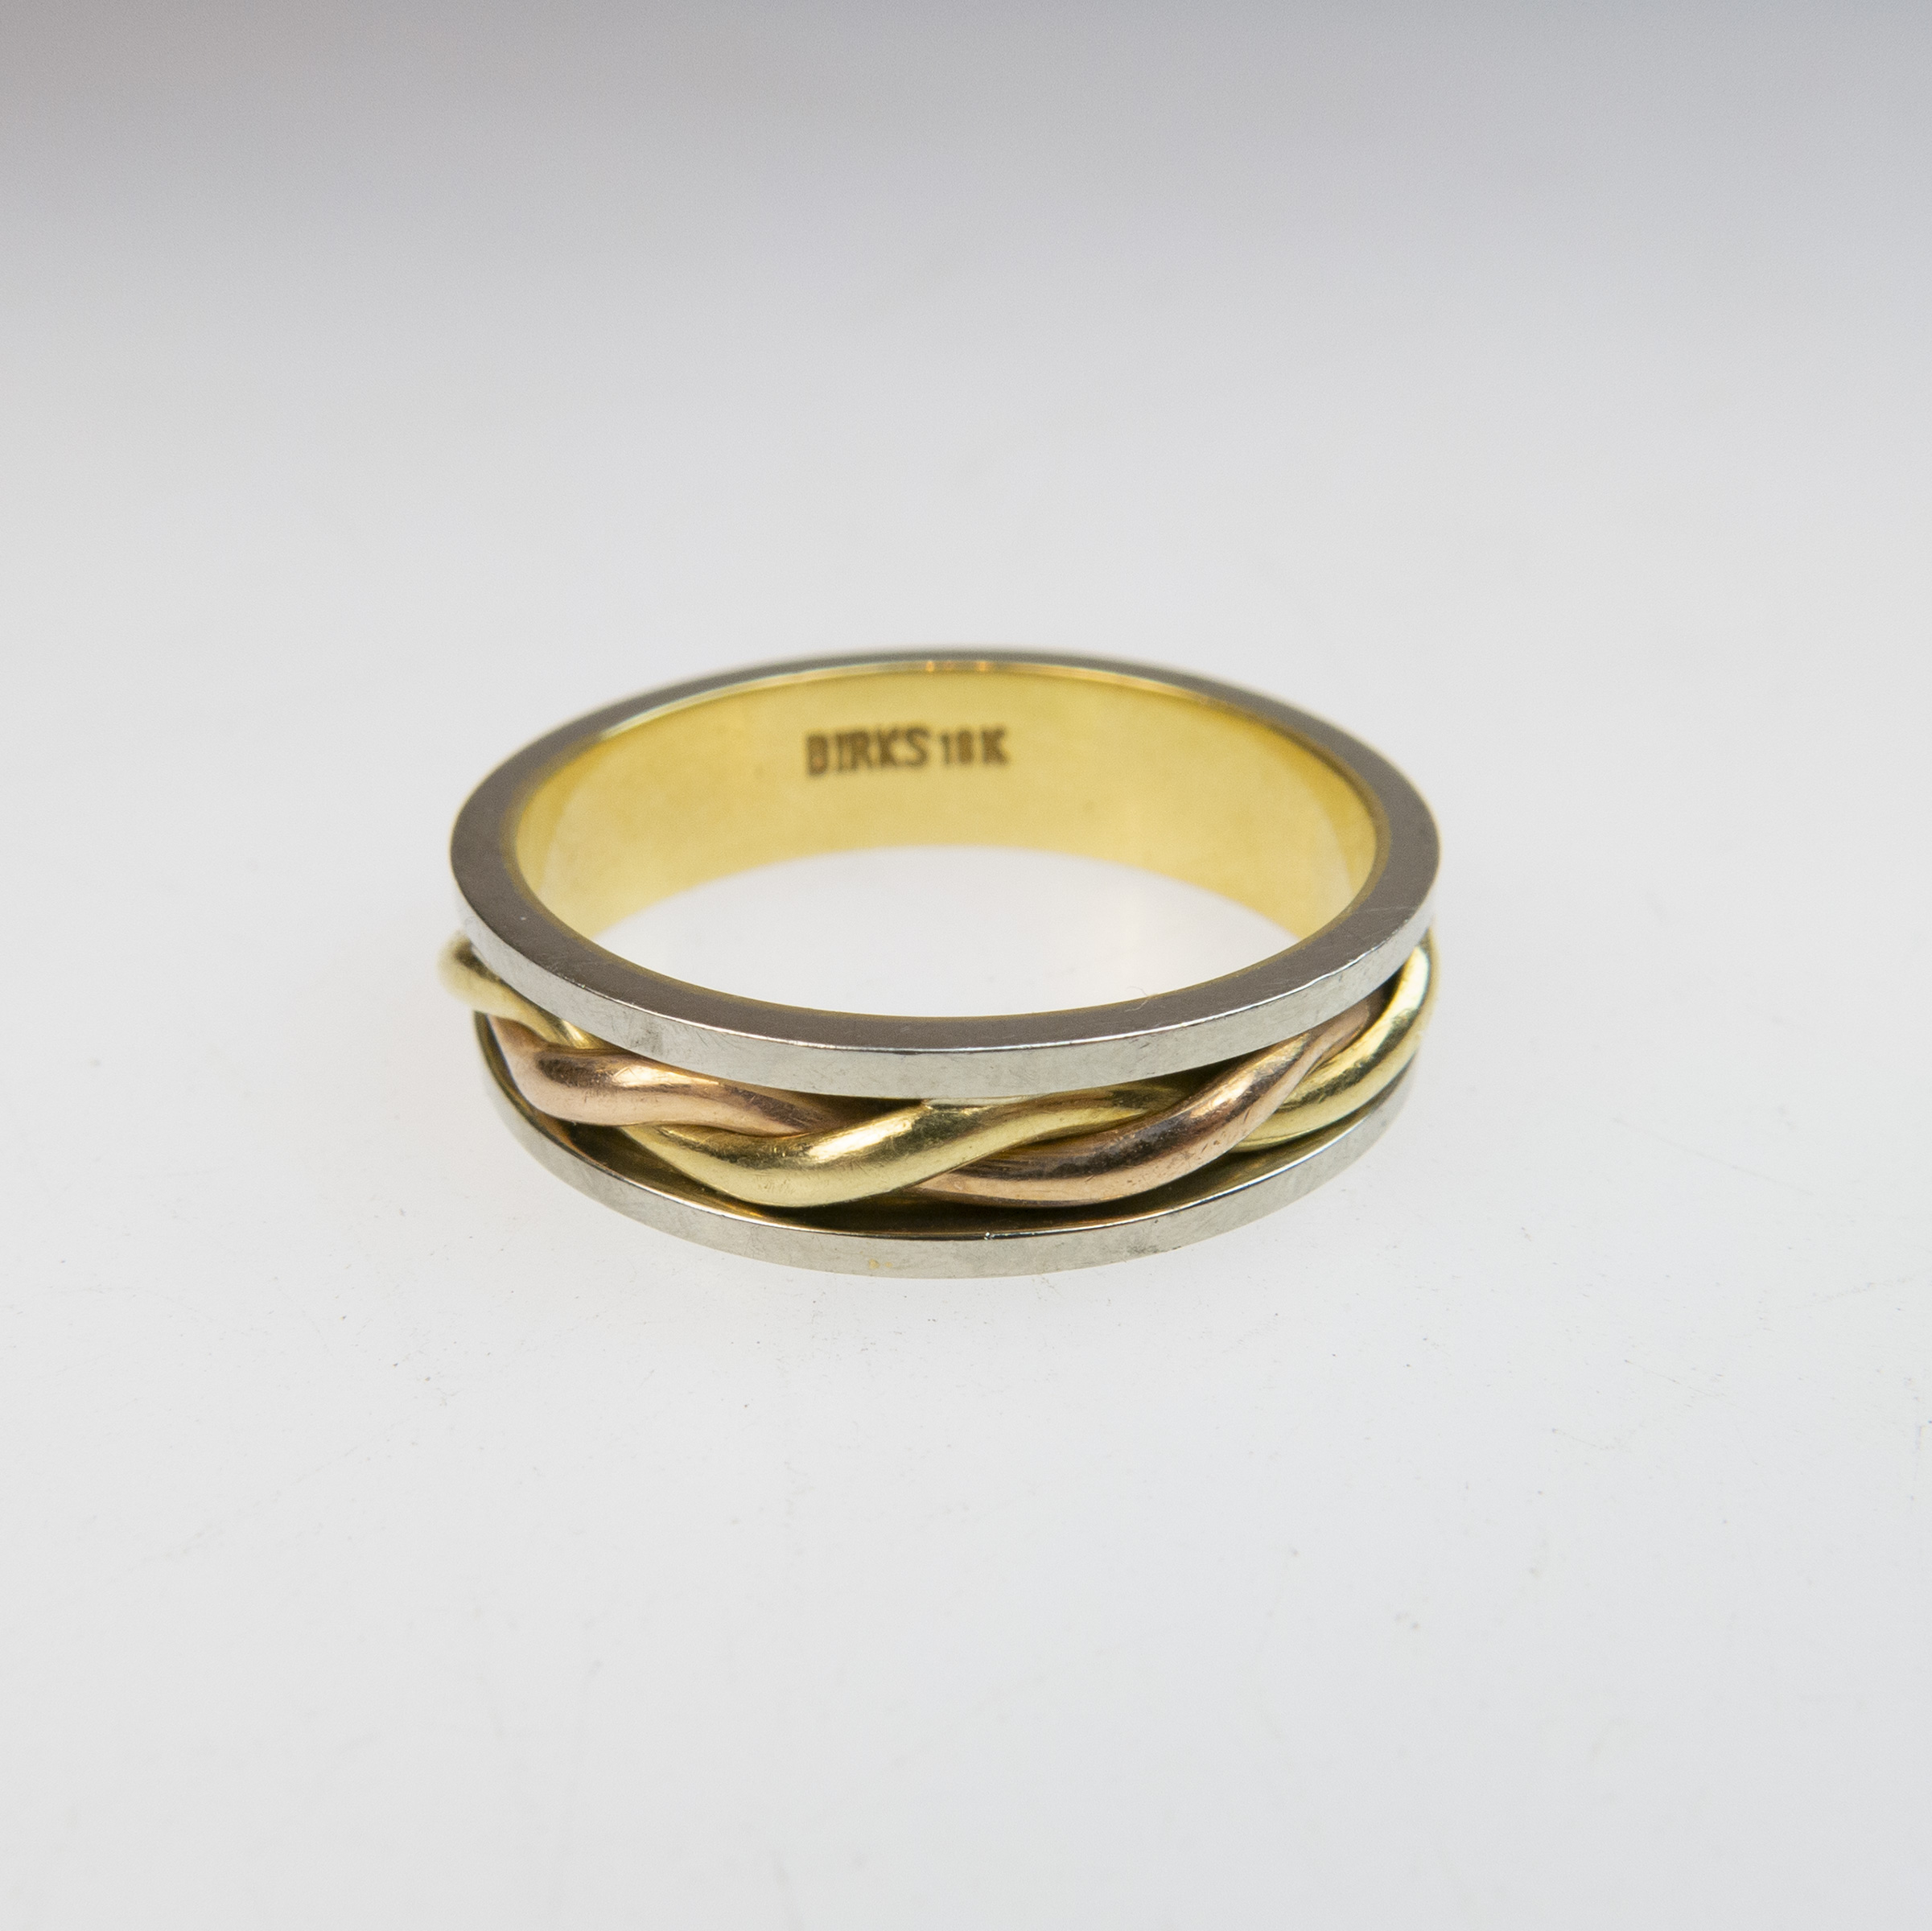 Birks 18k Yellow Gold And White Gold Band